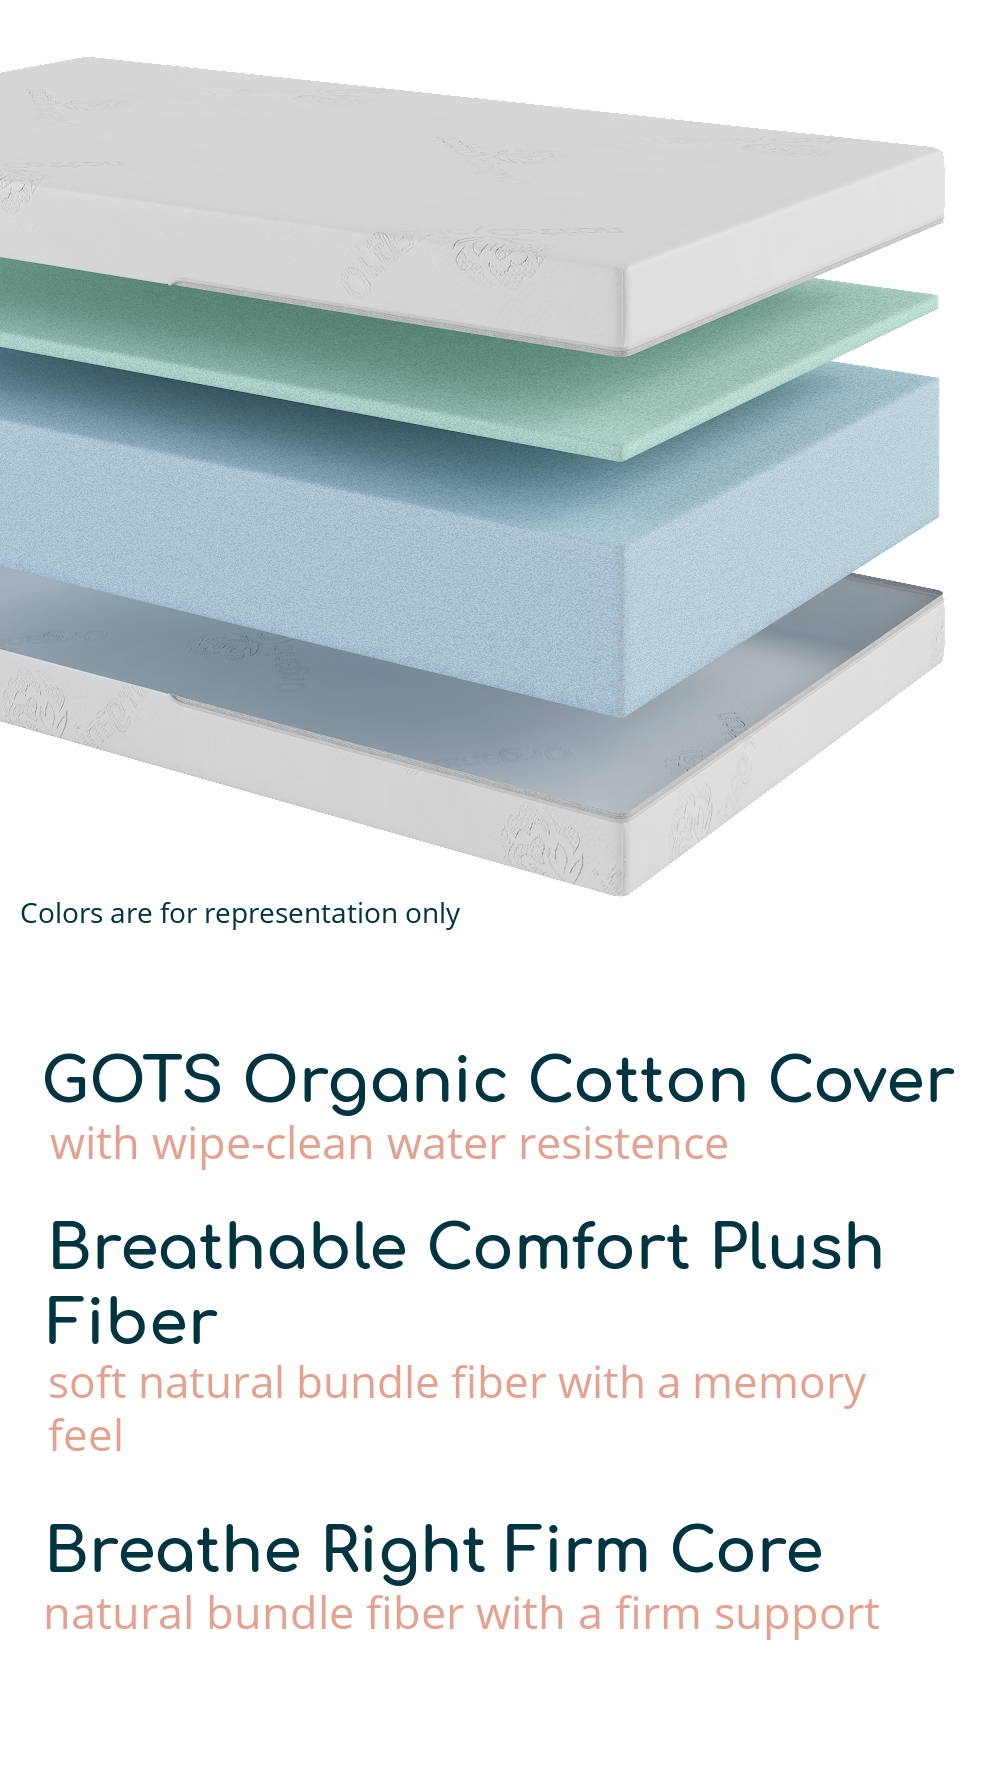 GOTS Organic Cotton Cover-with wipe clean resistance, Breathable Comfort Plush Fiber-soft natural bundle fiber with a memory feel, Breathe Right Firm Core-natural bundle fiber with a firm support